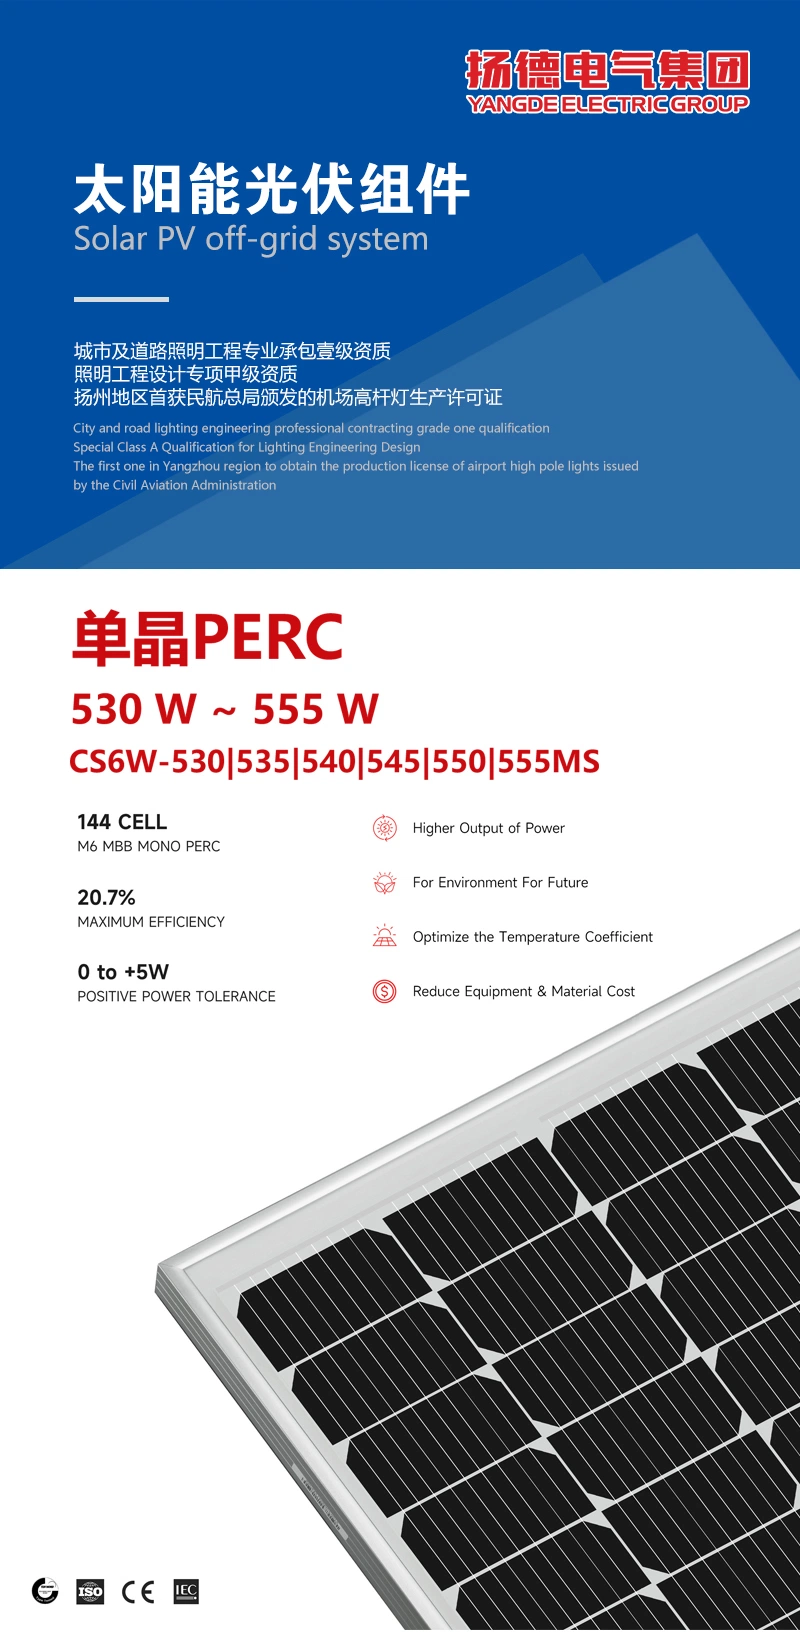 CE 10kw Solar off-Grid Power/Energy Photovoltaic Panel System with Wholesale Price